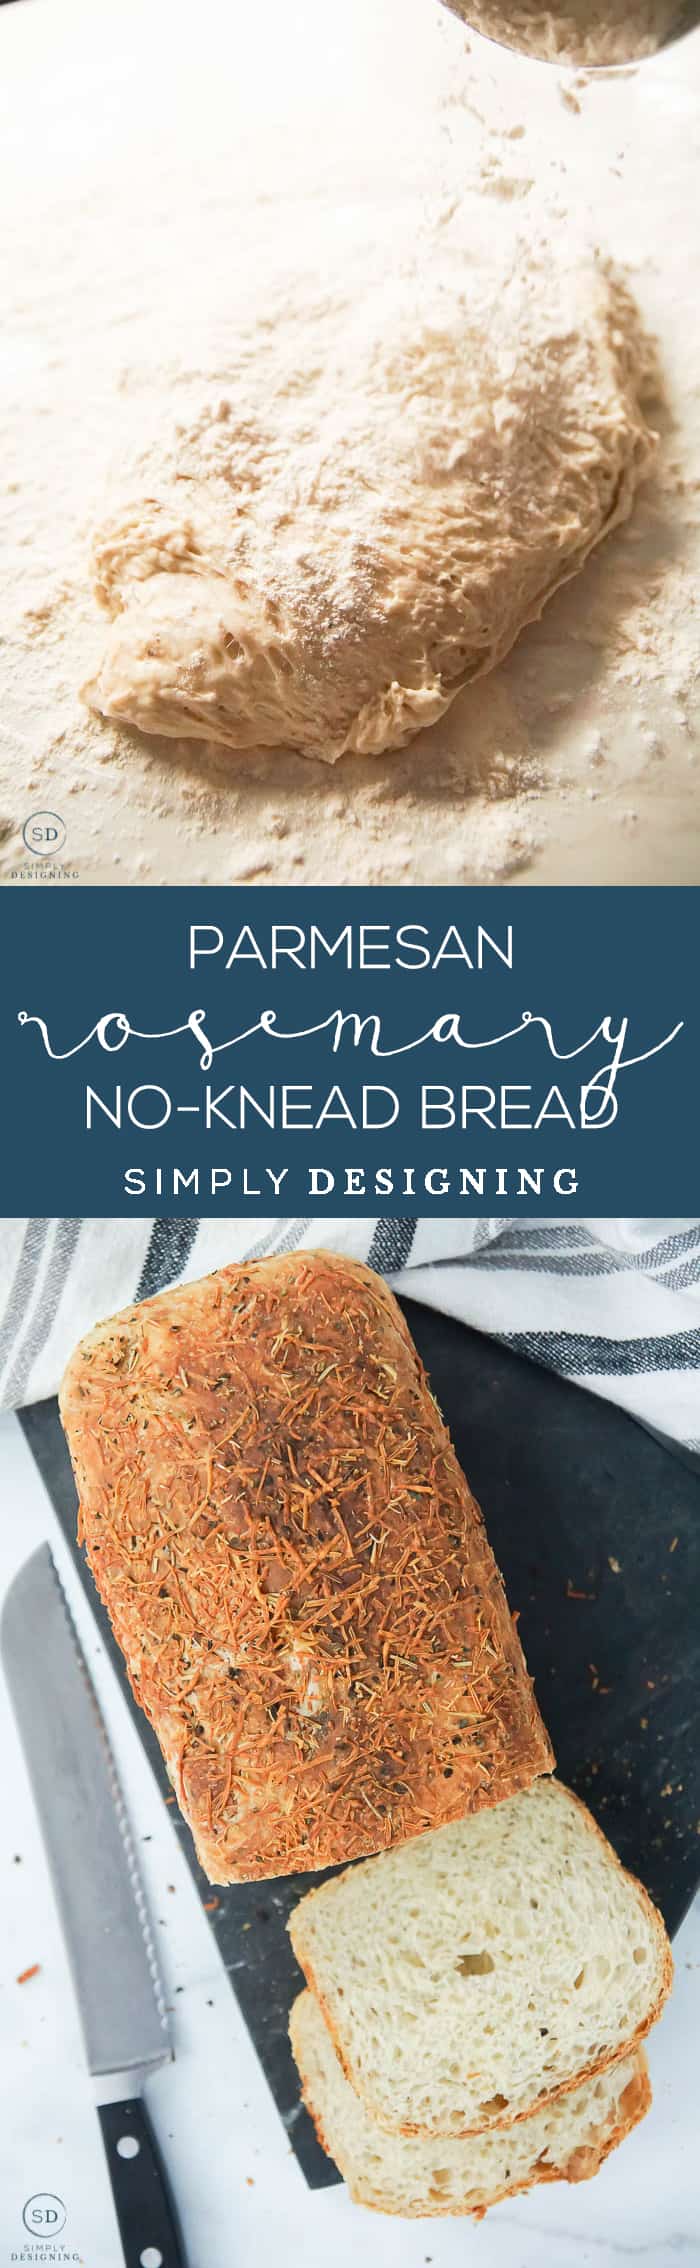 This no-knead Parmesan Rosemary Bread is simply delicious - It only takes about 5 minutes of hands-on time to make and is such a fluffy artisan bread